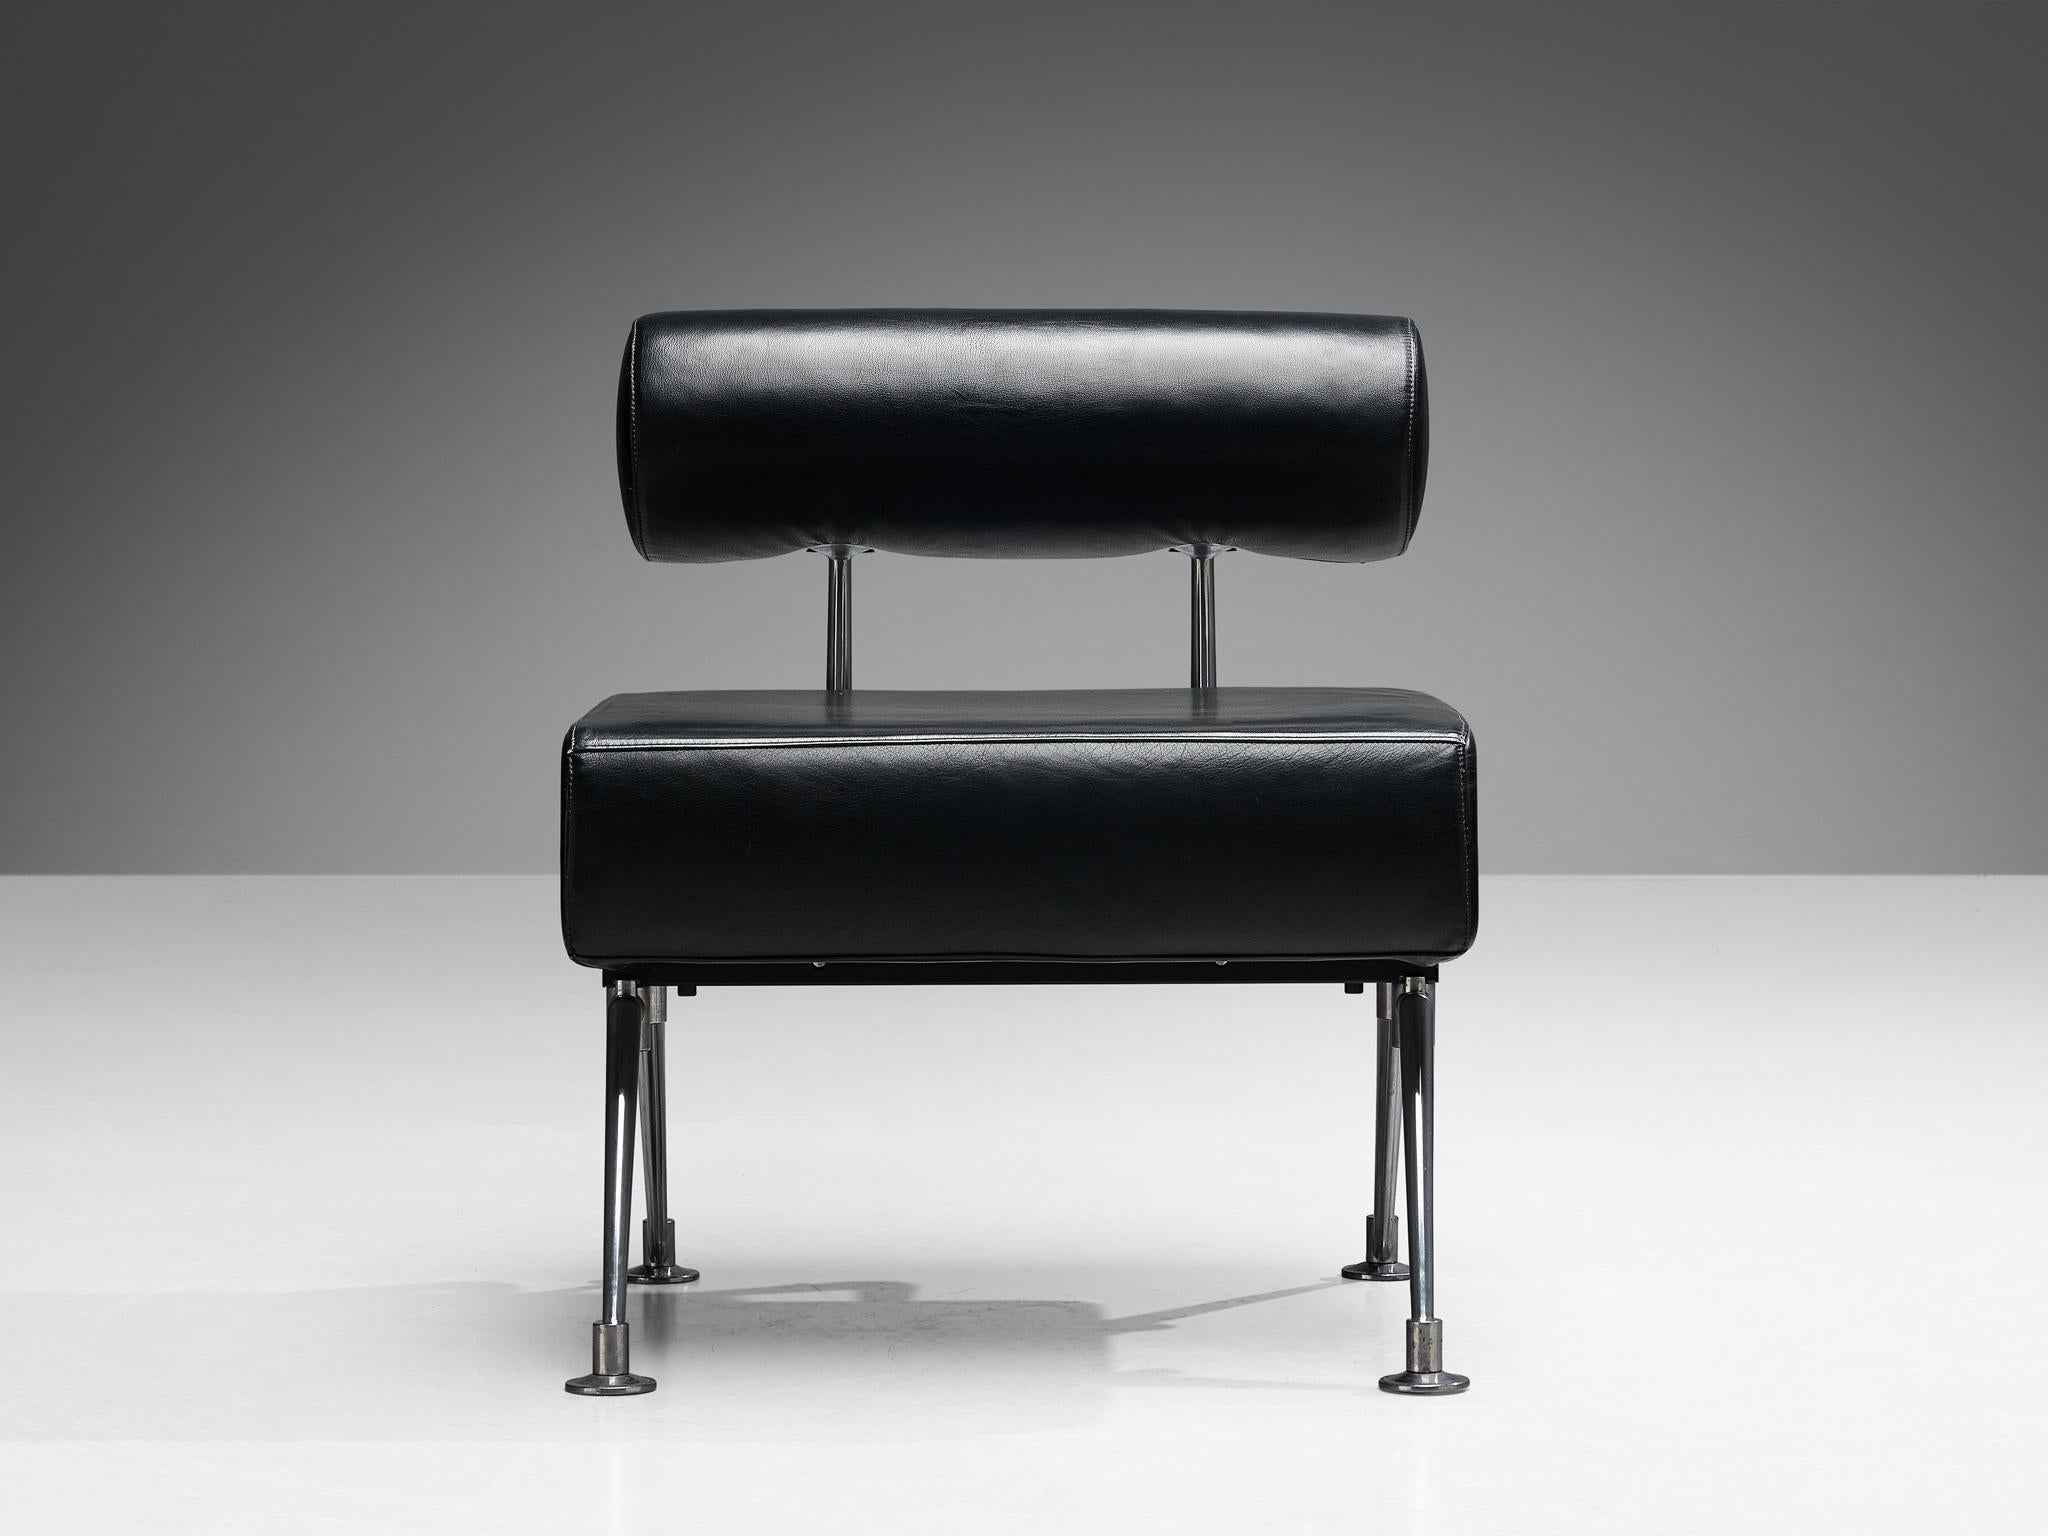 European Minimalist Modern Lounge Chair with Metal Frame and Black Leather For Sale